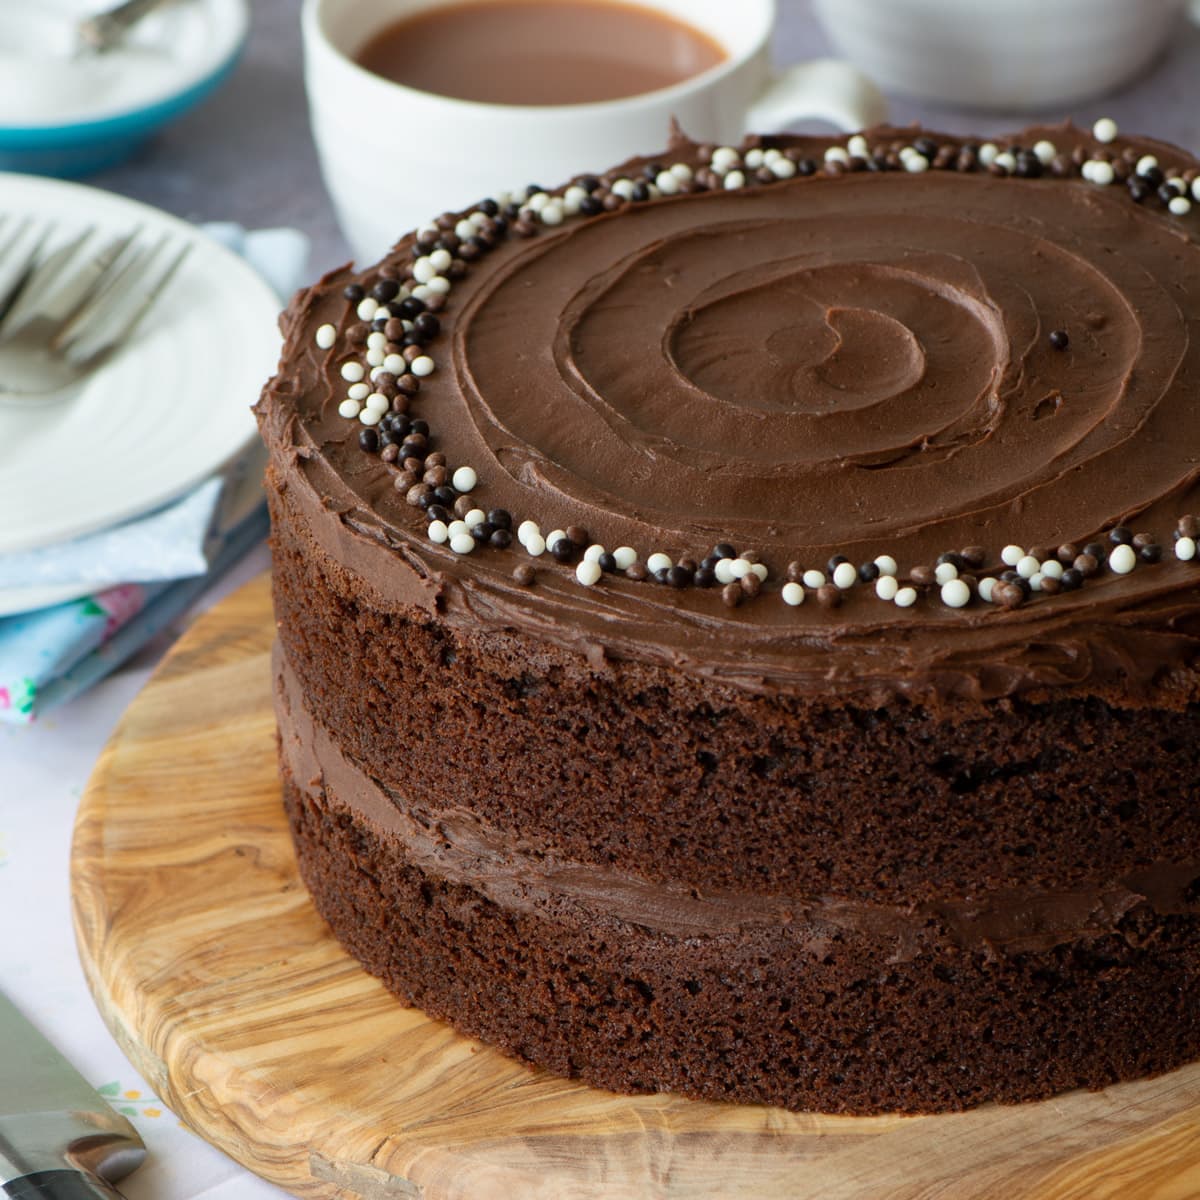 An easy chocolate cake that's moist, delicious and packed full of chocolate.